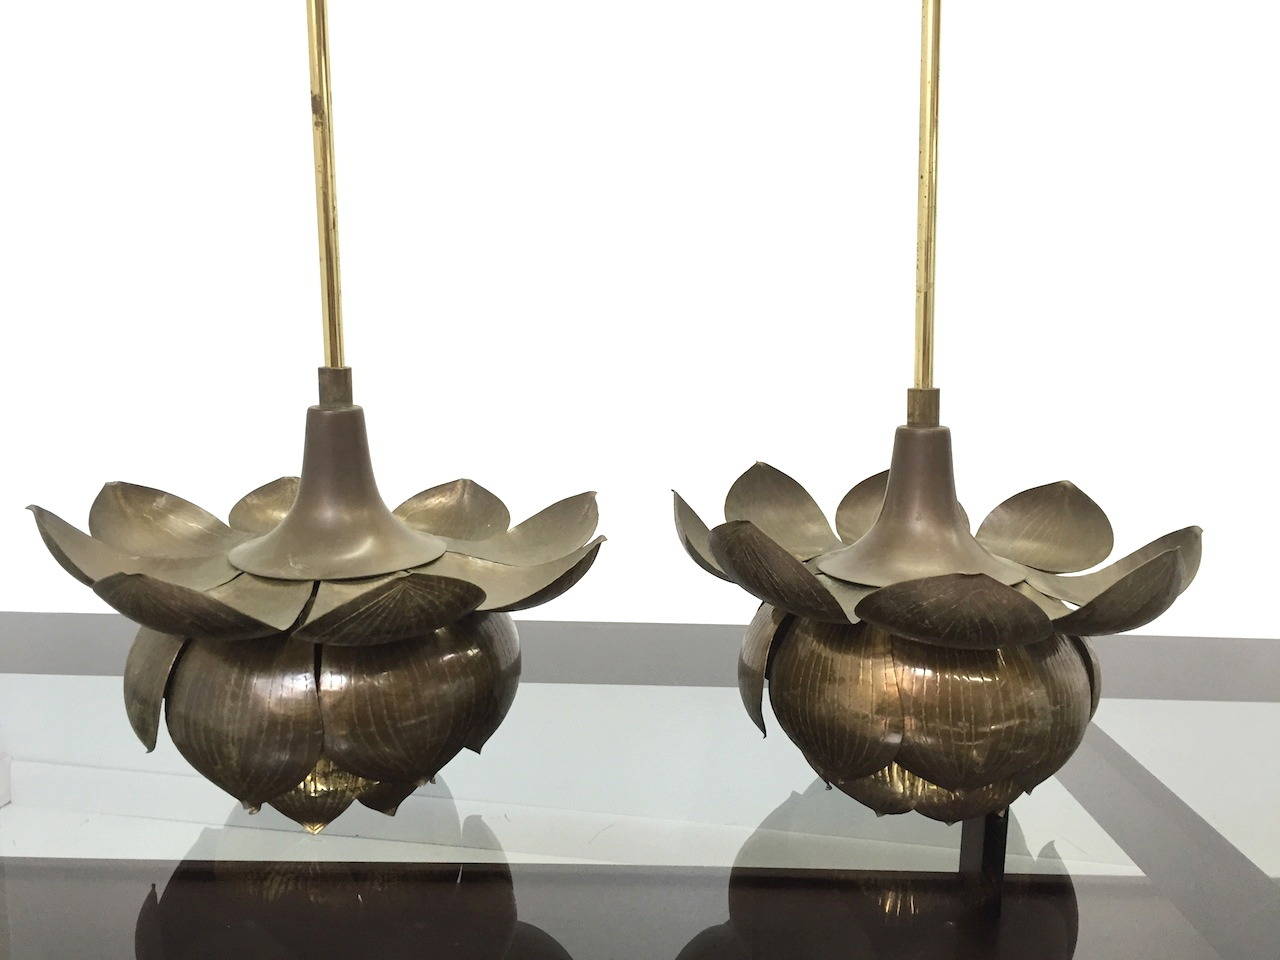 Pair of Vintage Brass Lotus Pendant Lights by Feldman.  Nice original condition with a desirable patina from age.  These are currently fitted with long brass tubes for the wiring which can be re-used, shortened, or replaced with a chain depending on